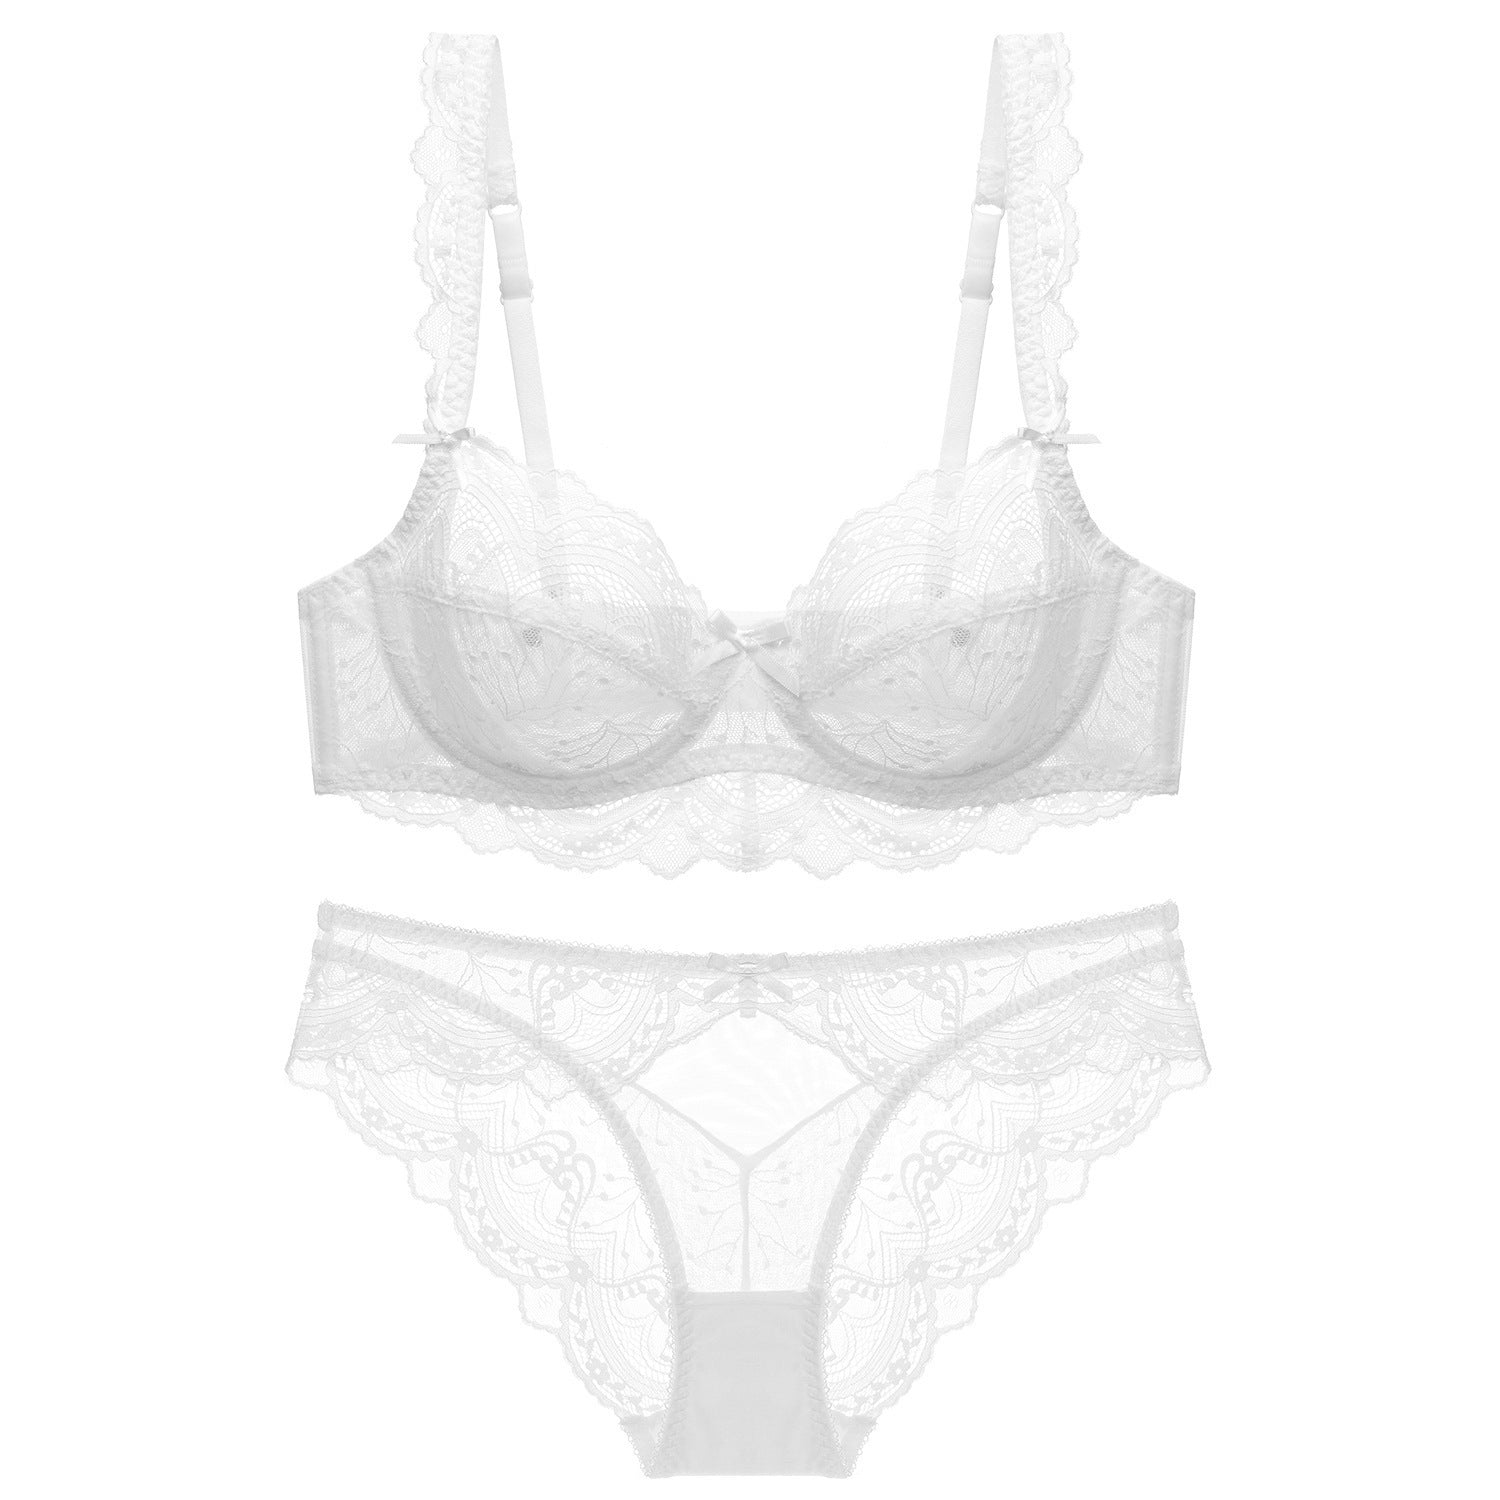 New Hollow Ultra Thin Lace Sexy Bralette Set